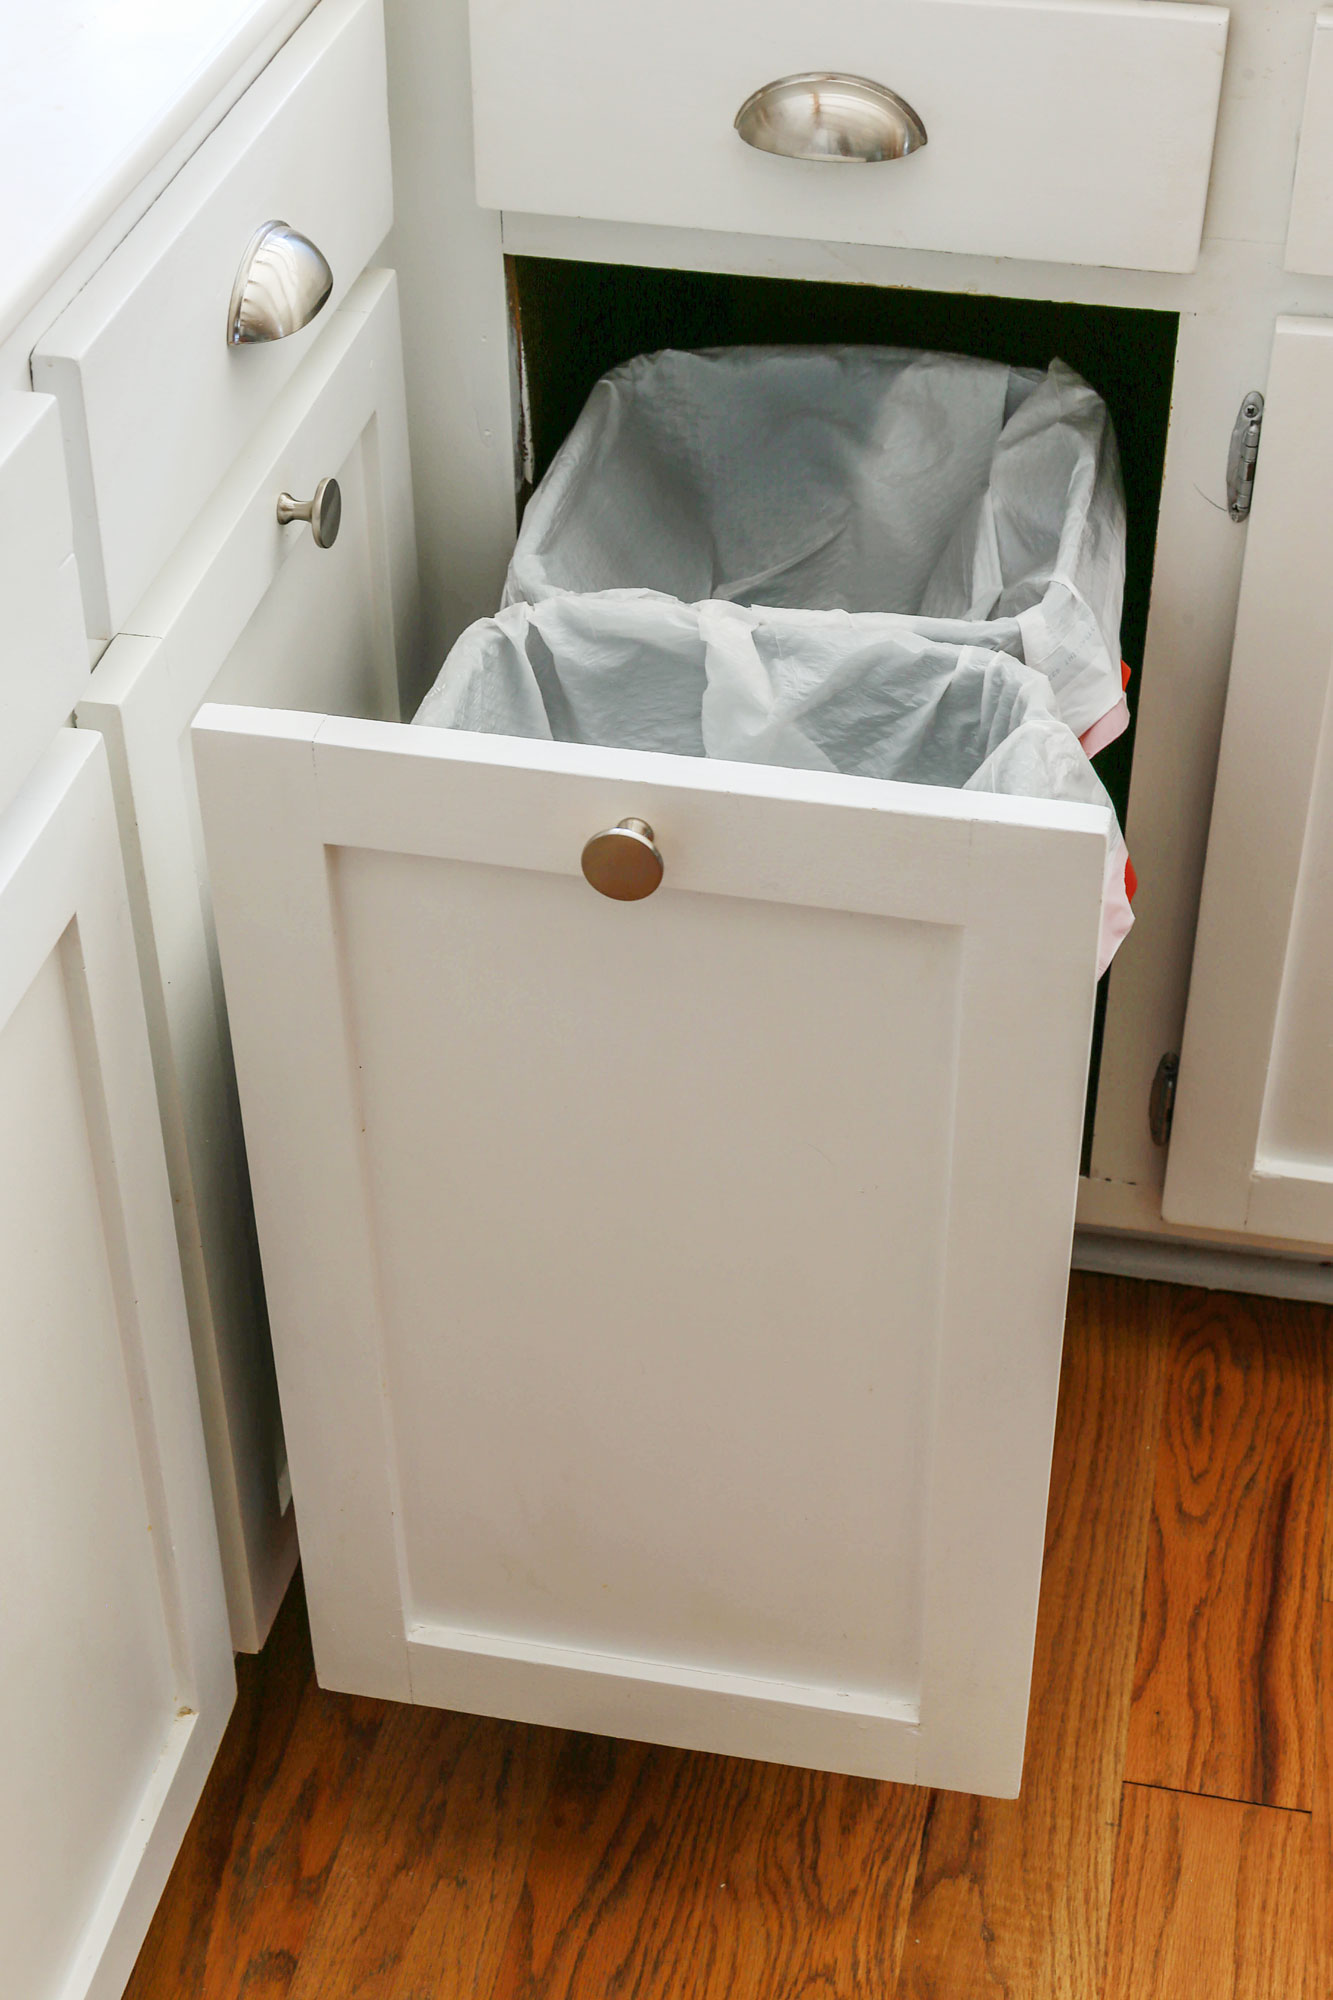 LIFE HACK: Turn Any Cabinet DOOR Into a DRAWER 